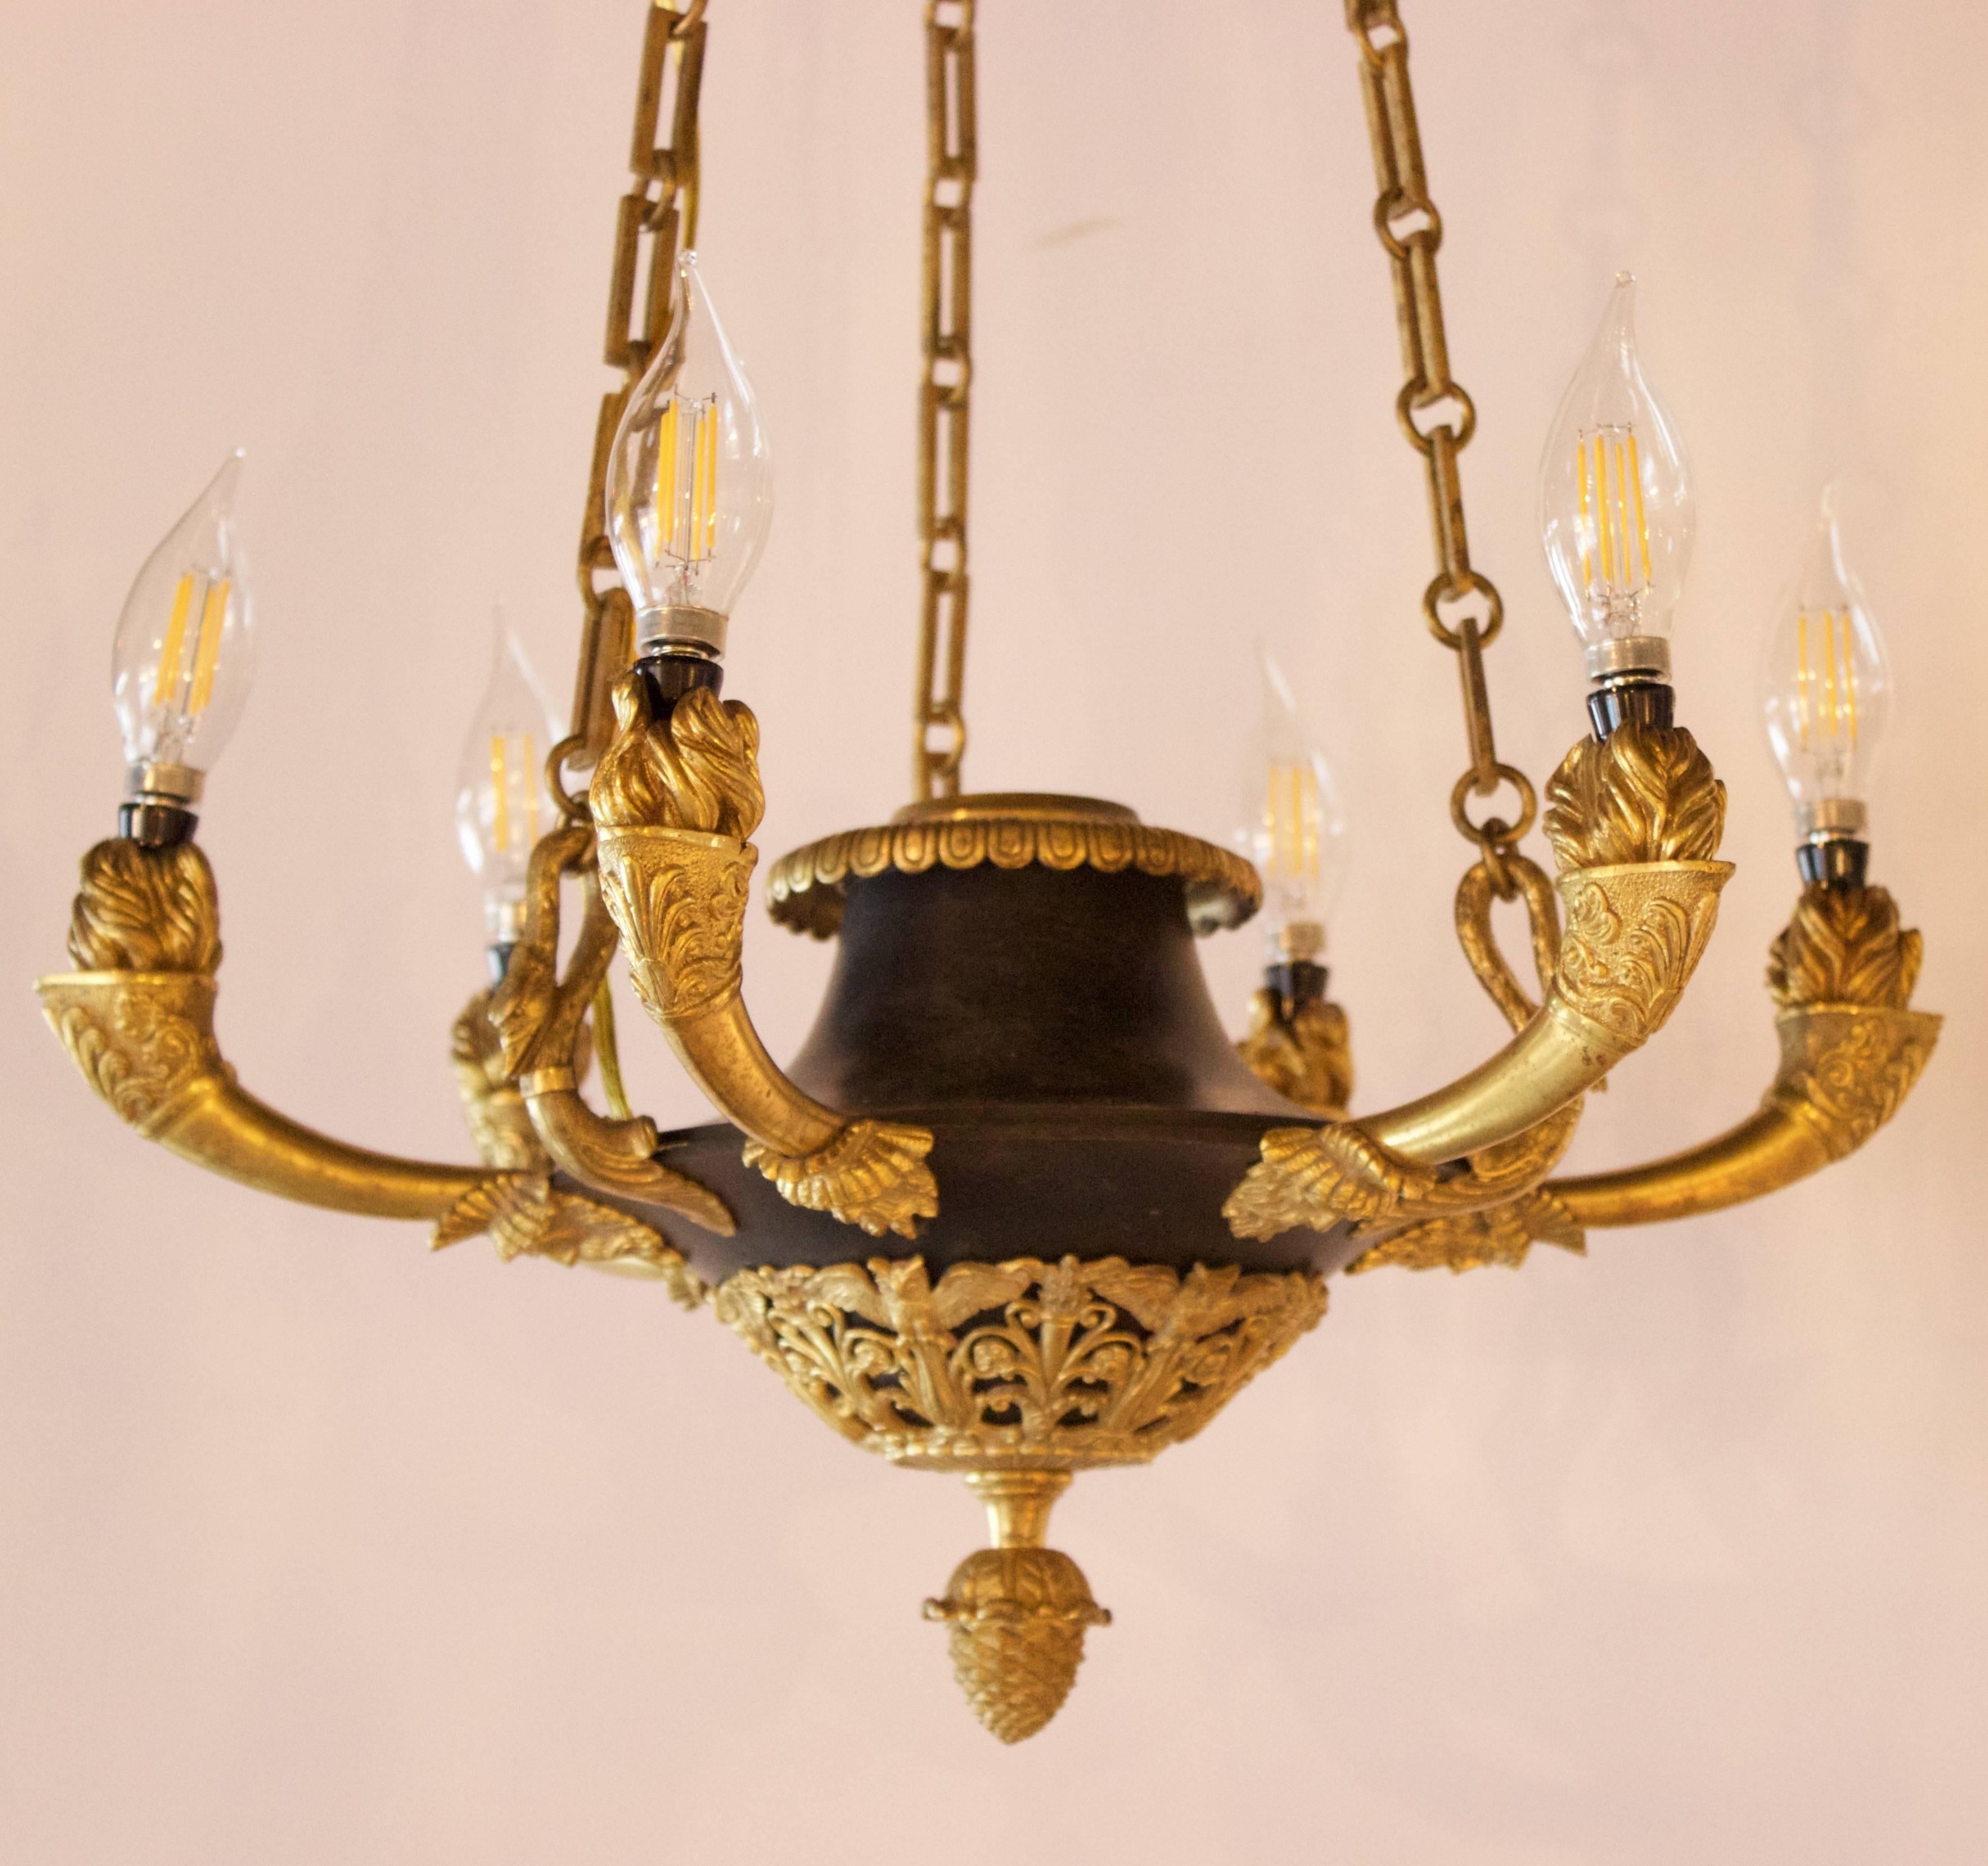 French 1st Empire Pd Chandelier with six lights,  
France, circa 1810.
Elegant and original in its design to fit the shape of an antique lamp. Made of very finely chased and or moulu gilded bronzes and patinated dark lacquered zinc based